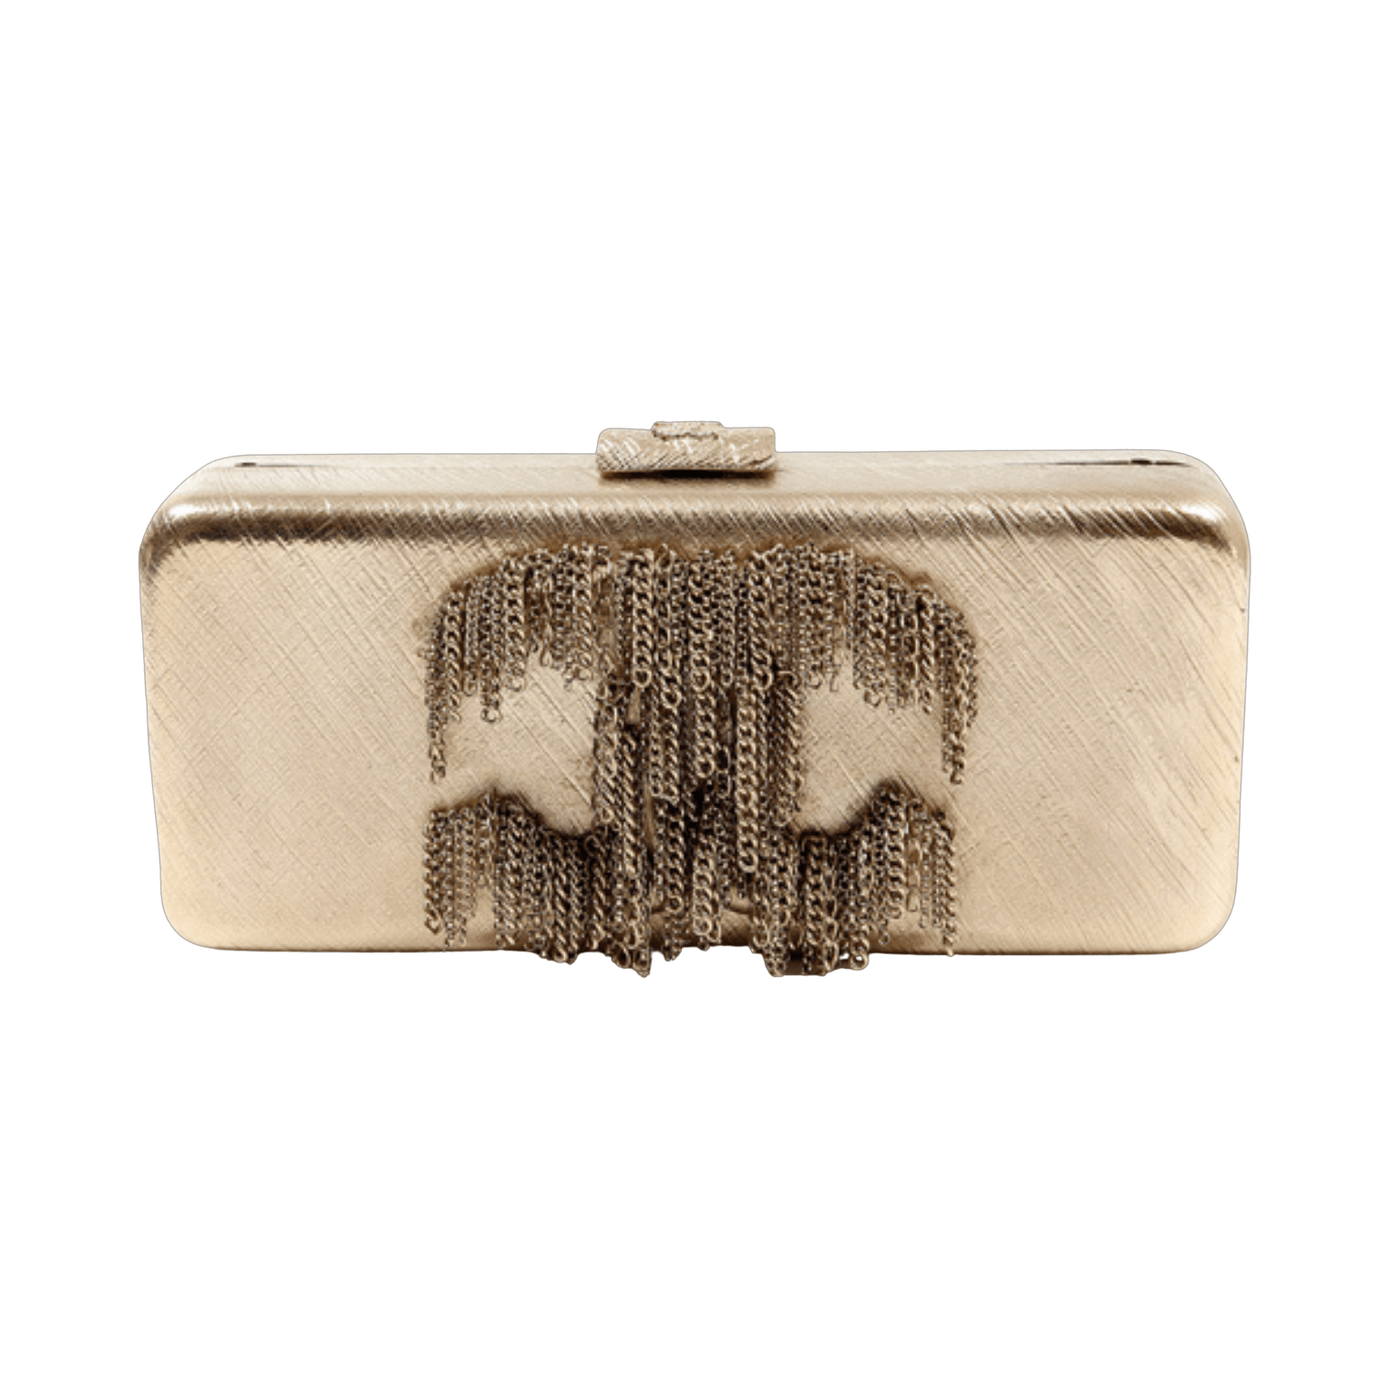 Chanel Gold CC Dripping Chains Box Clutch – Only Authentics